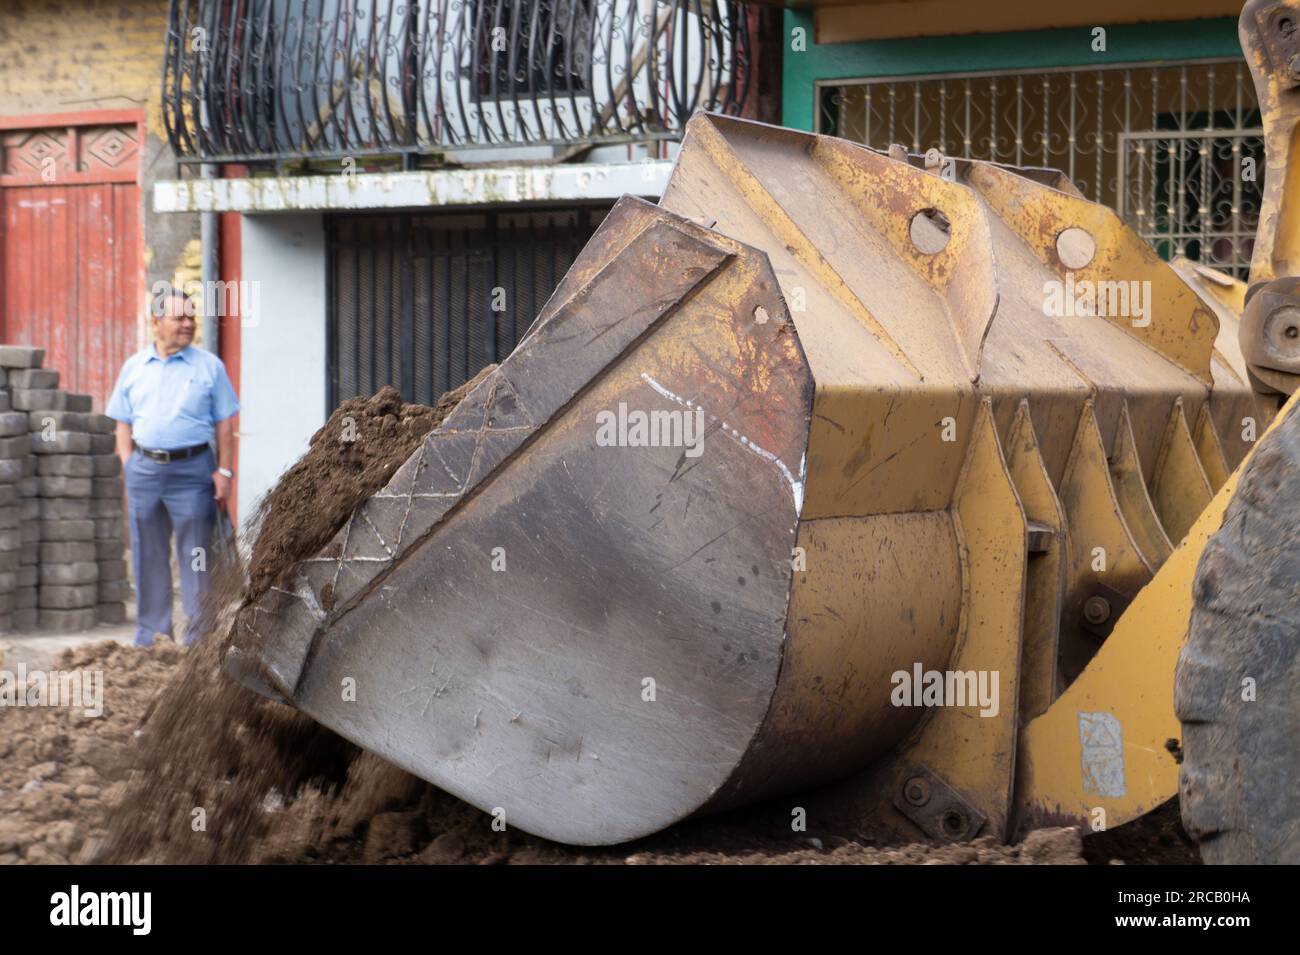 Front bucket of a earth moving machine dumping early as man looks off to the side.  This was part of a sewer system repair in Jinotega, Nicaragua. Stock Photo